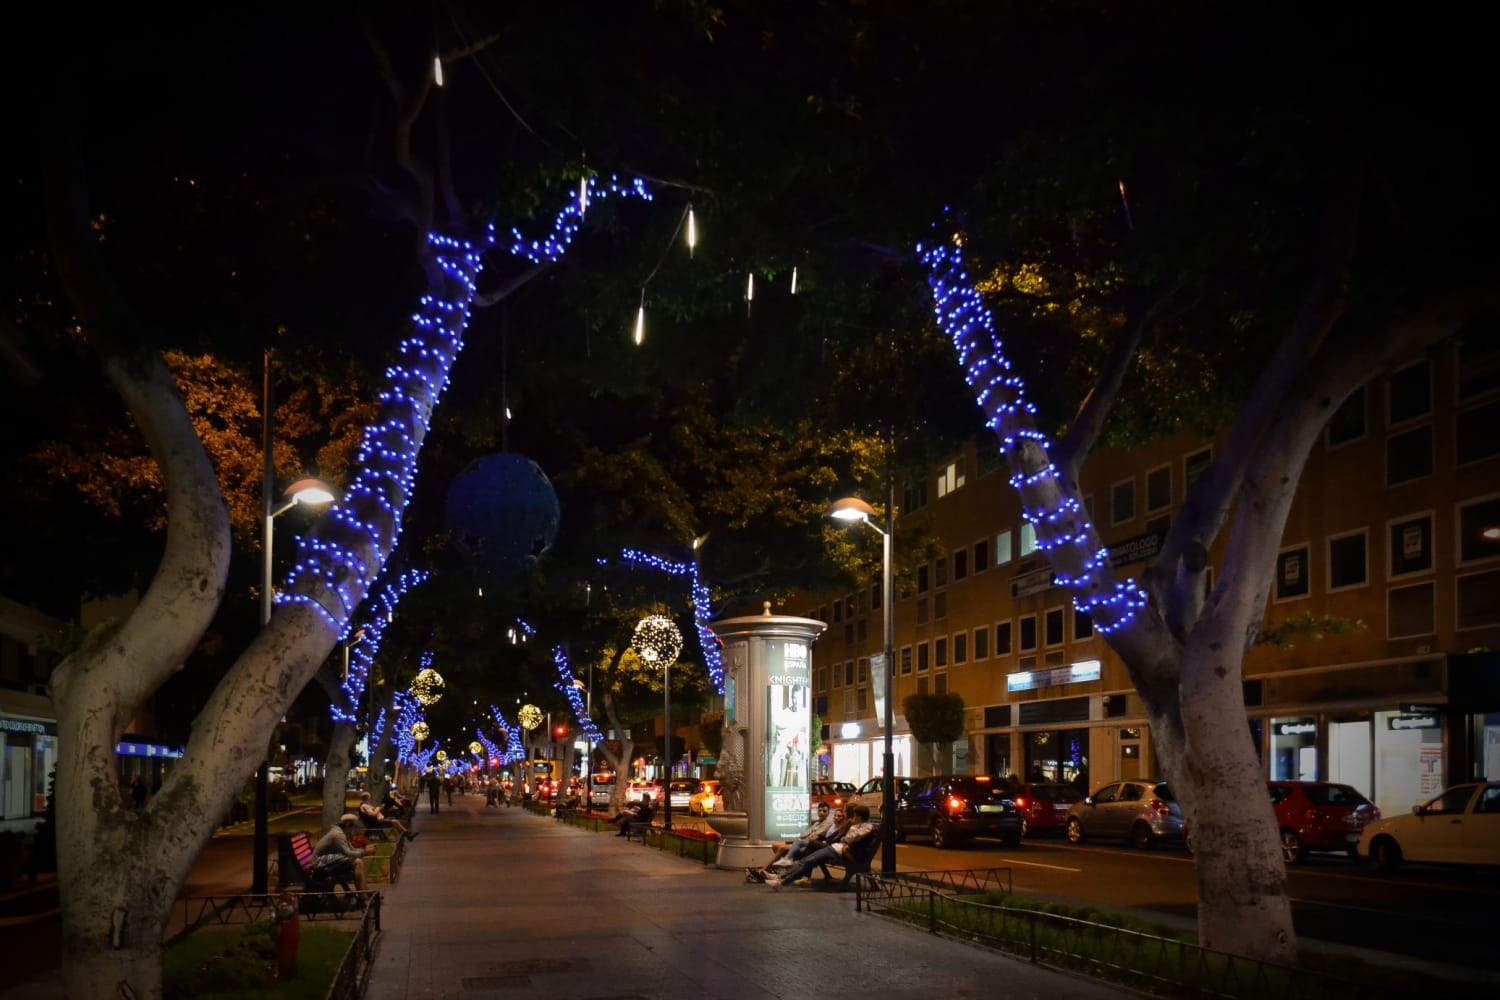 In pictures: Las Palmas streets at night